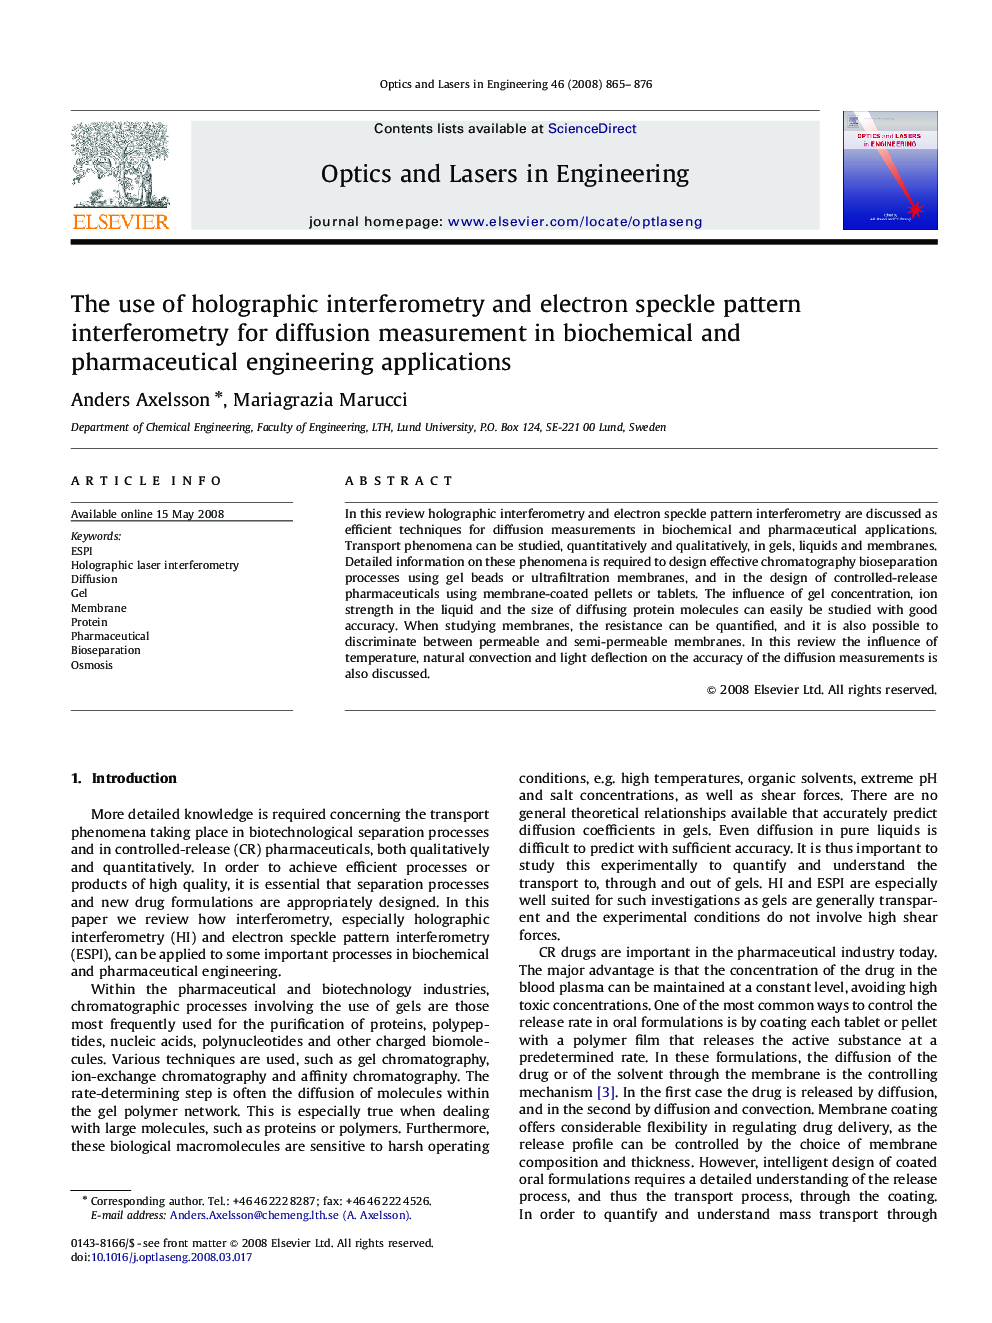 The use of holographic interferometry and electron speckle pattern interferometry for diffusion measurement in biochemical and pharmaceutical engineering applications